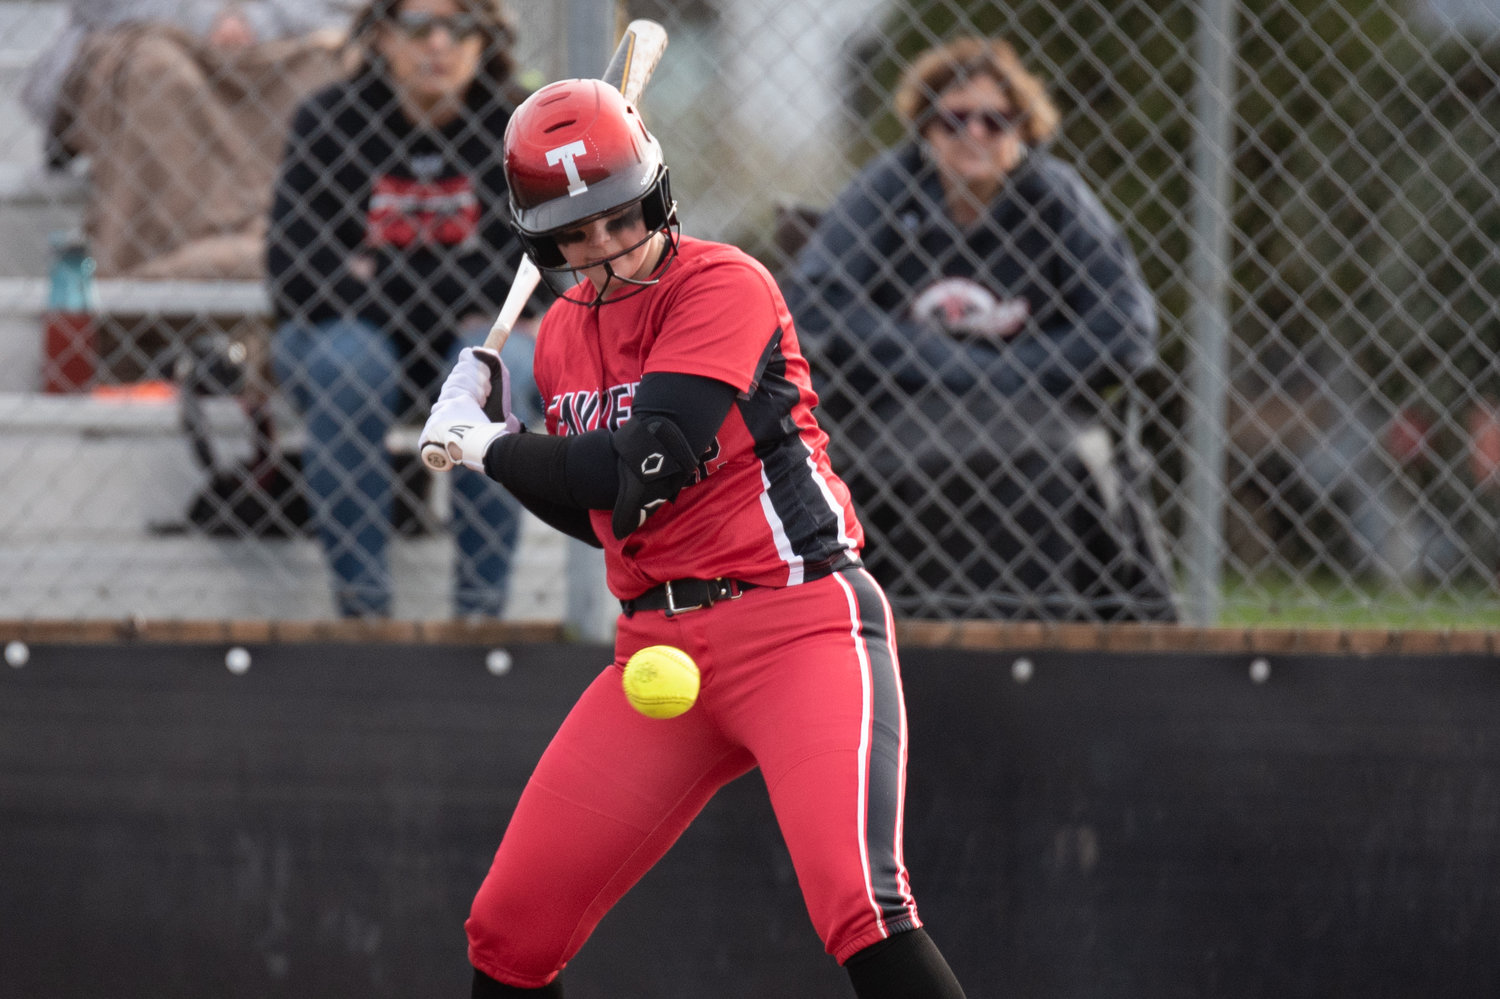 Tenino catcher Courtney Backman looks at a pitch against Rainier March 24.